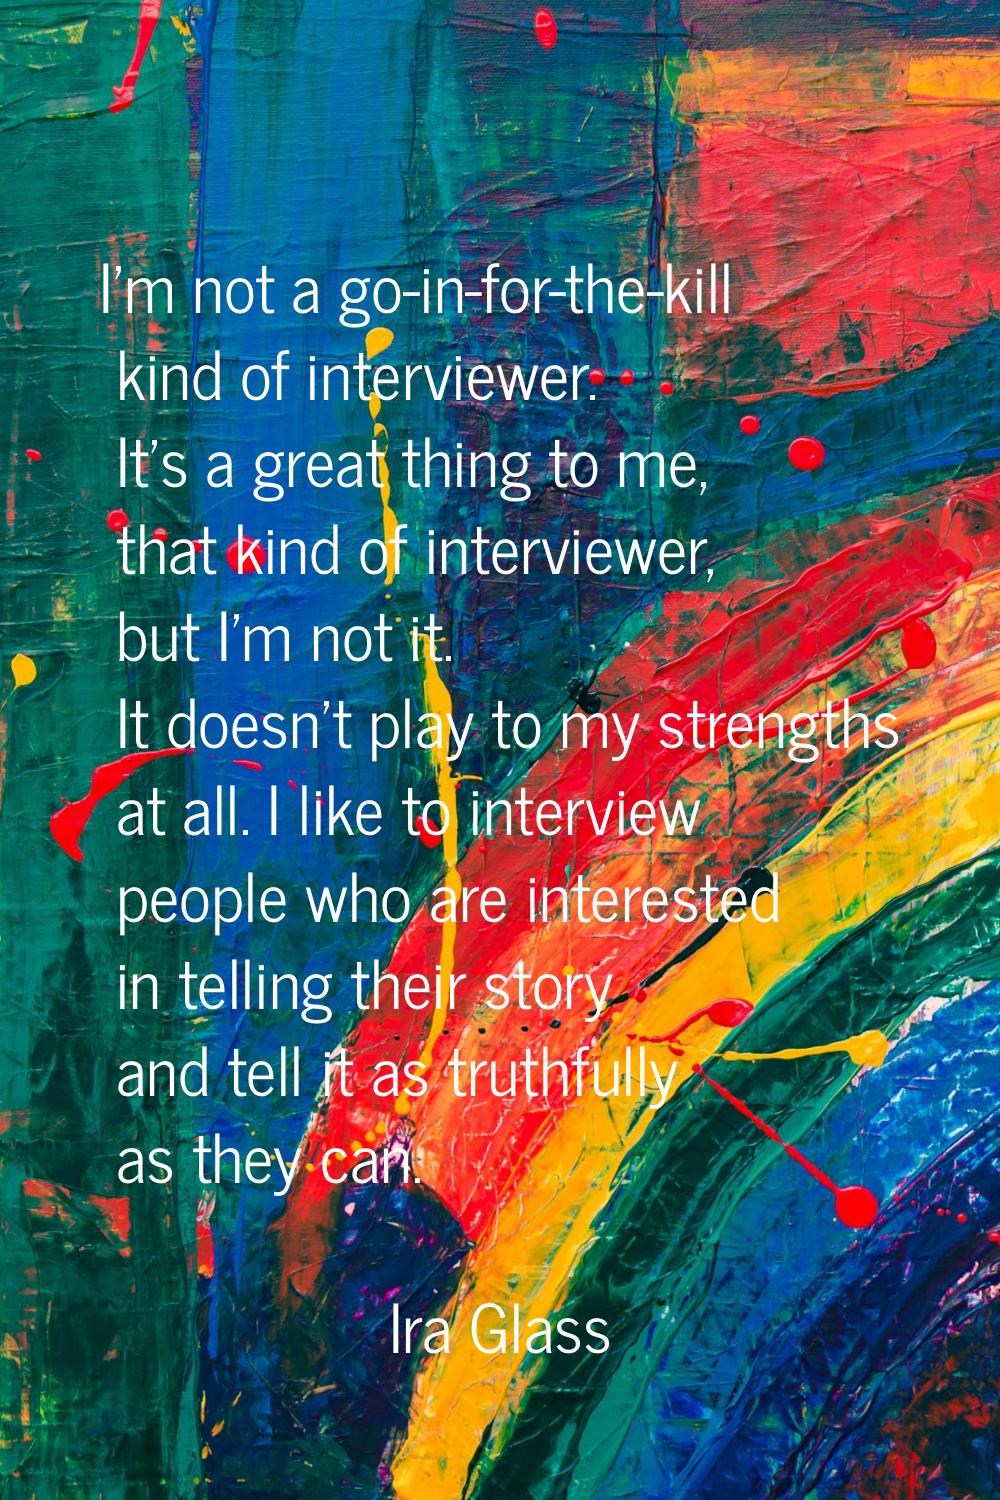 I'm not a go-in-for-the-kill kind of interviewer. It's a great thing to me, that kind of interviewe